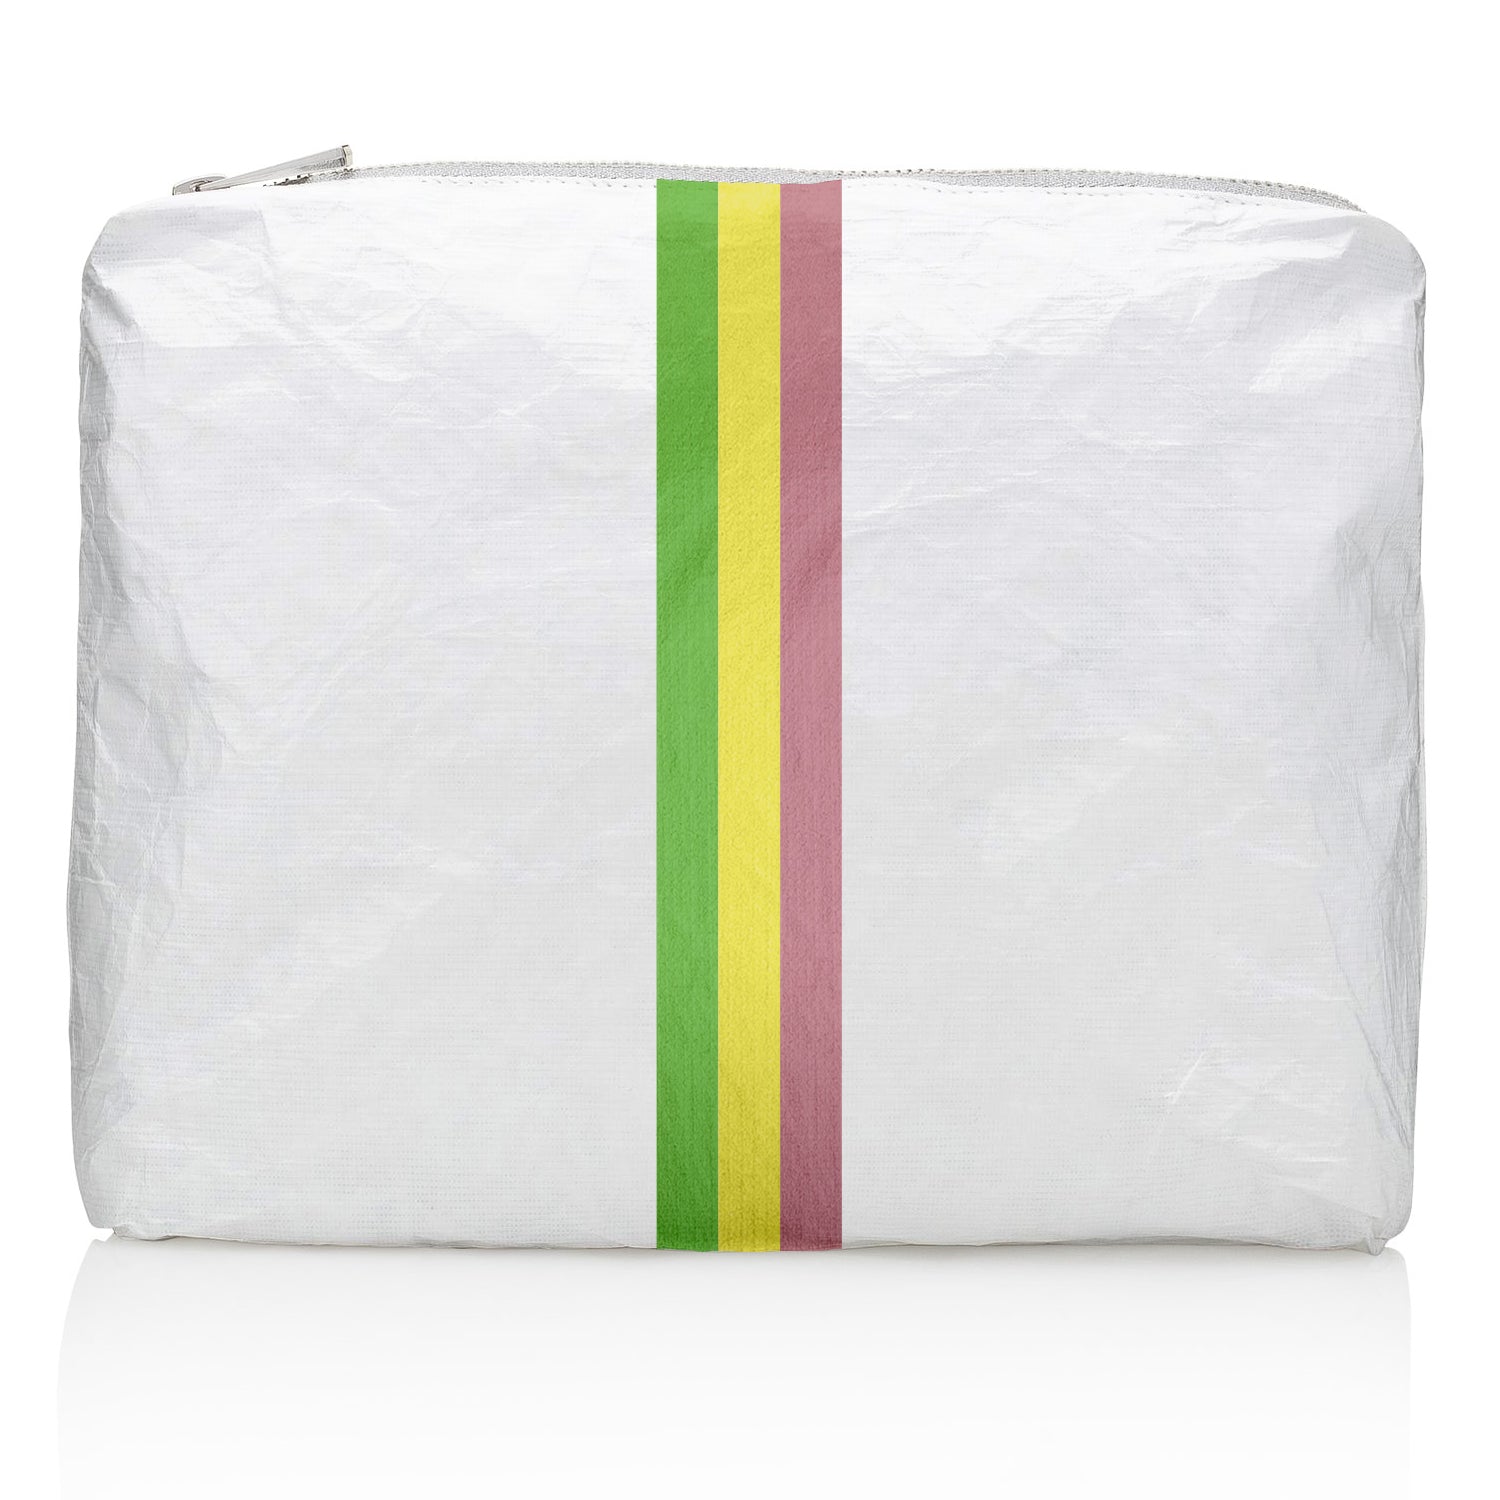 Medium Zipper Pack in Shimmer White with Colorful Green, Yellow, and Pink Stripes